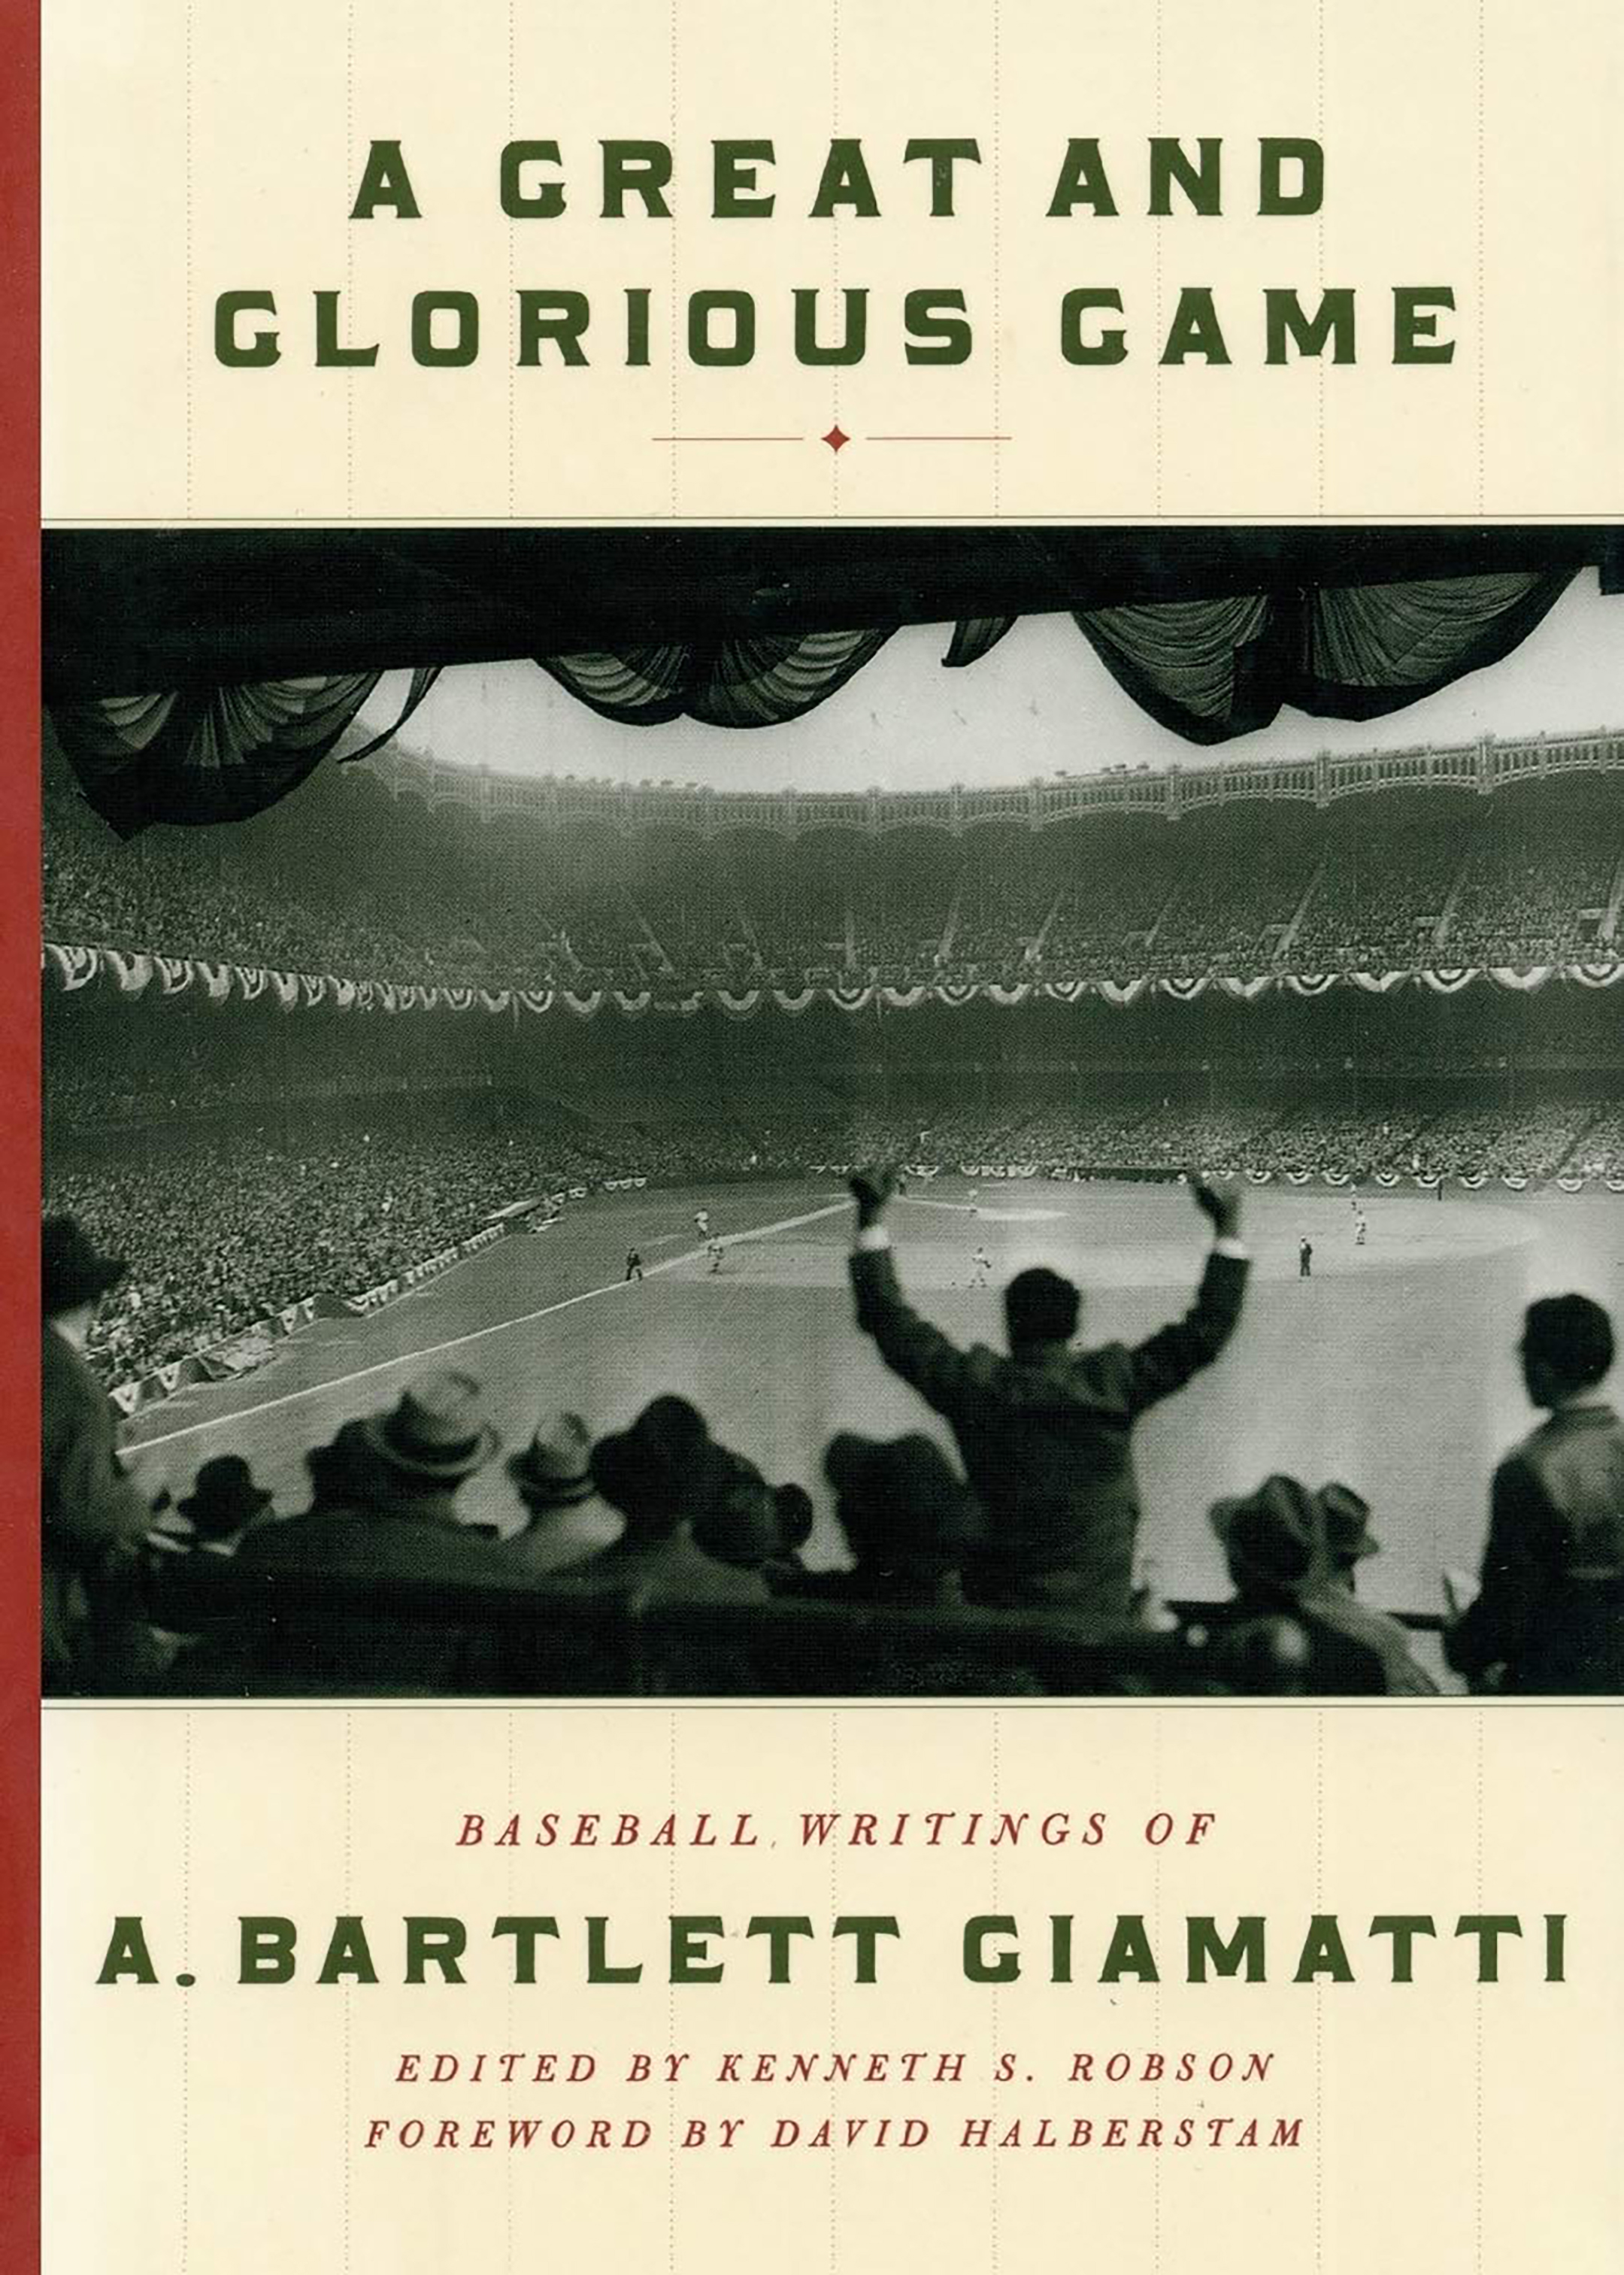 The cover of A. Bartlett Giamatti's book "A Great and Glorious Game," which includes his essay "The Green Fields of the Mind"